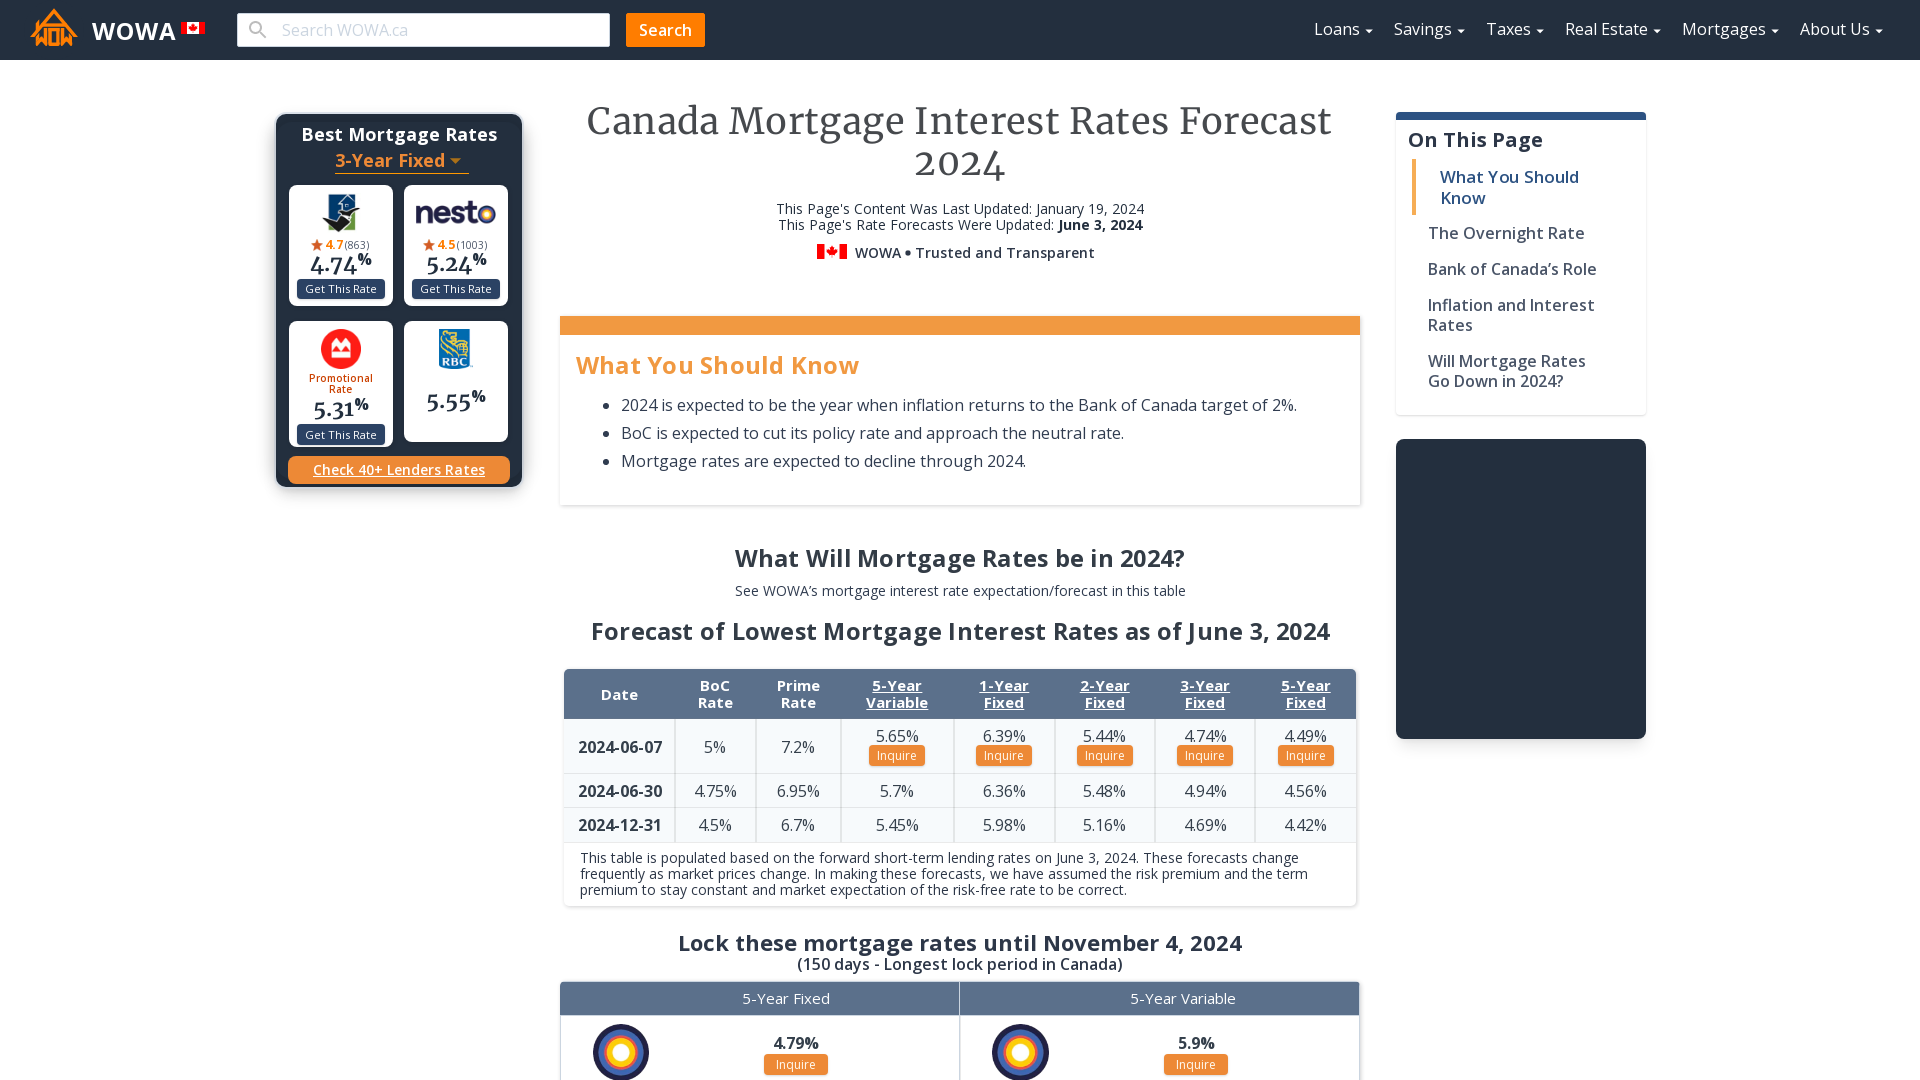 2024 Mortgage Rates Forecast (Updated June 27, 2023) WOWA.ca